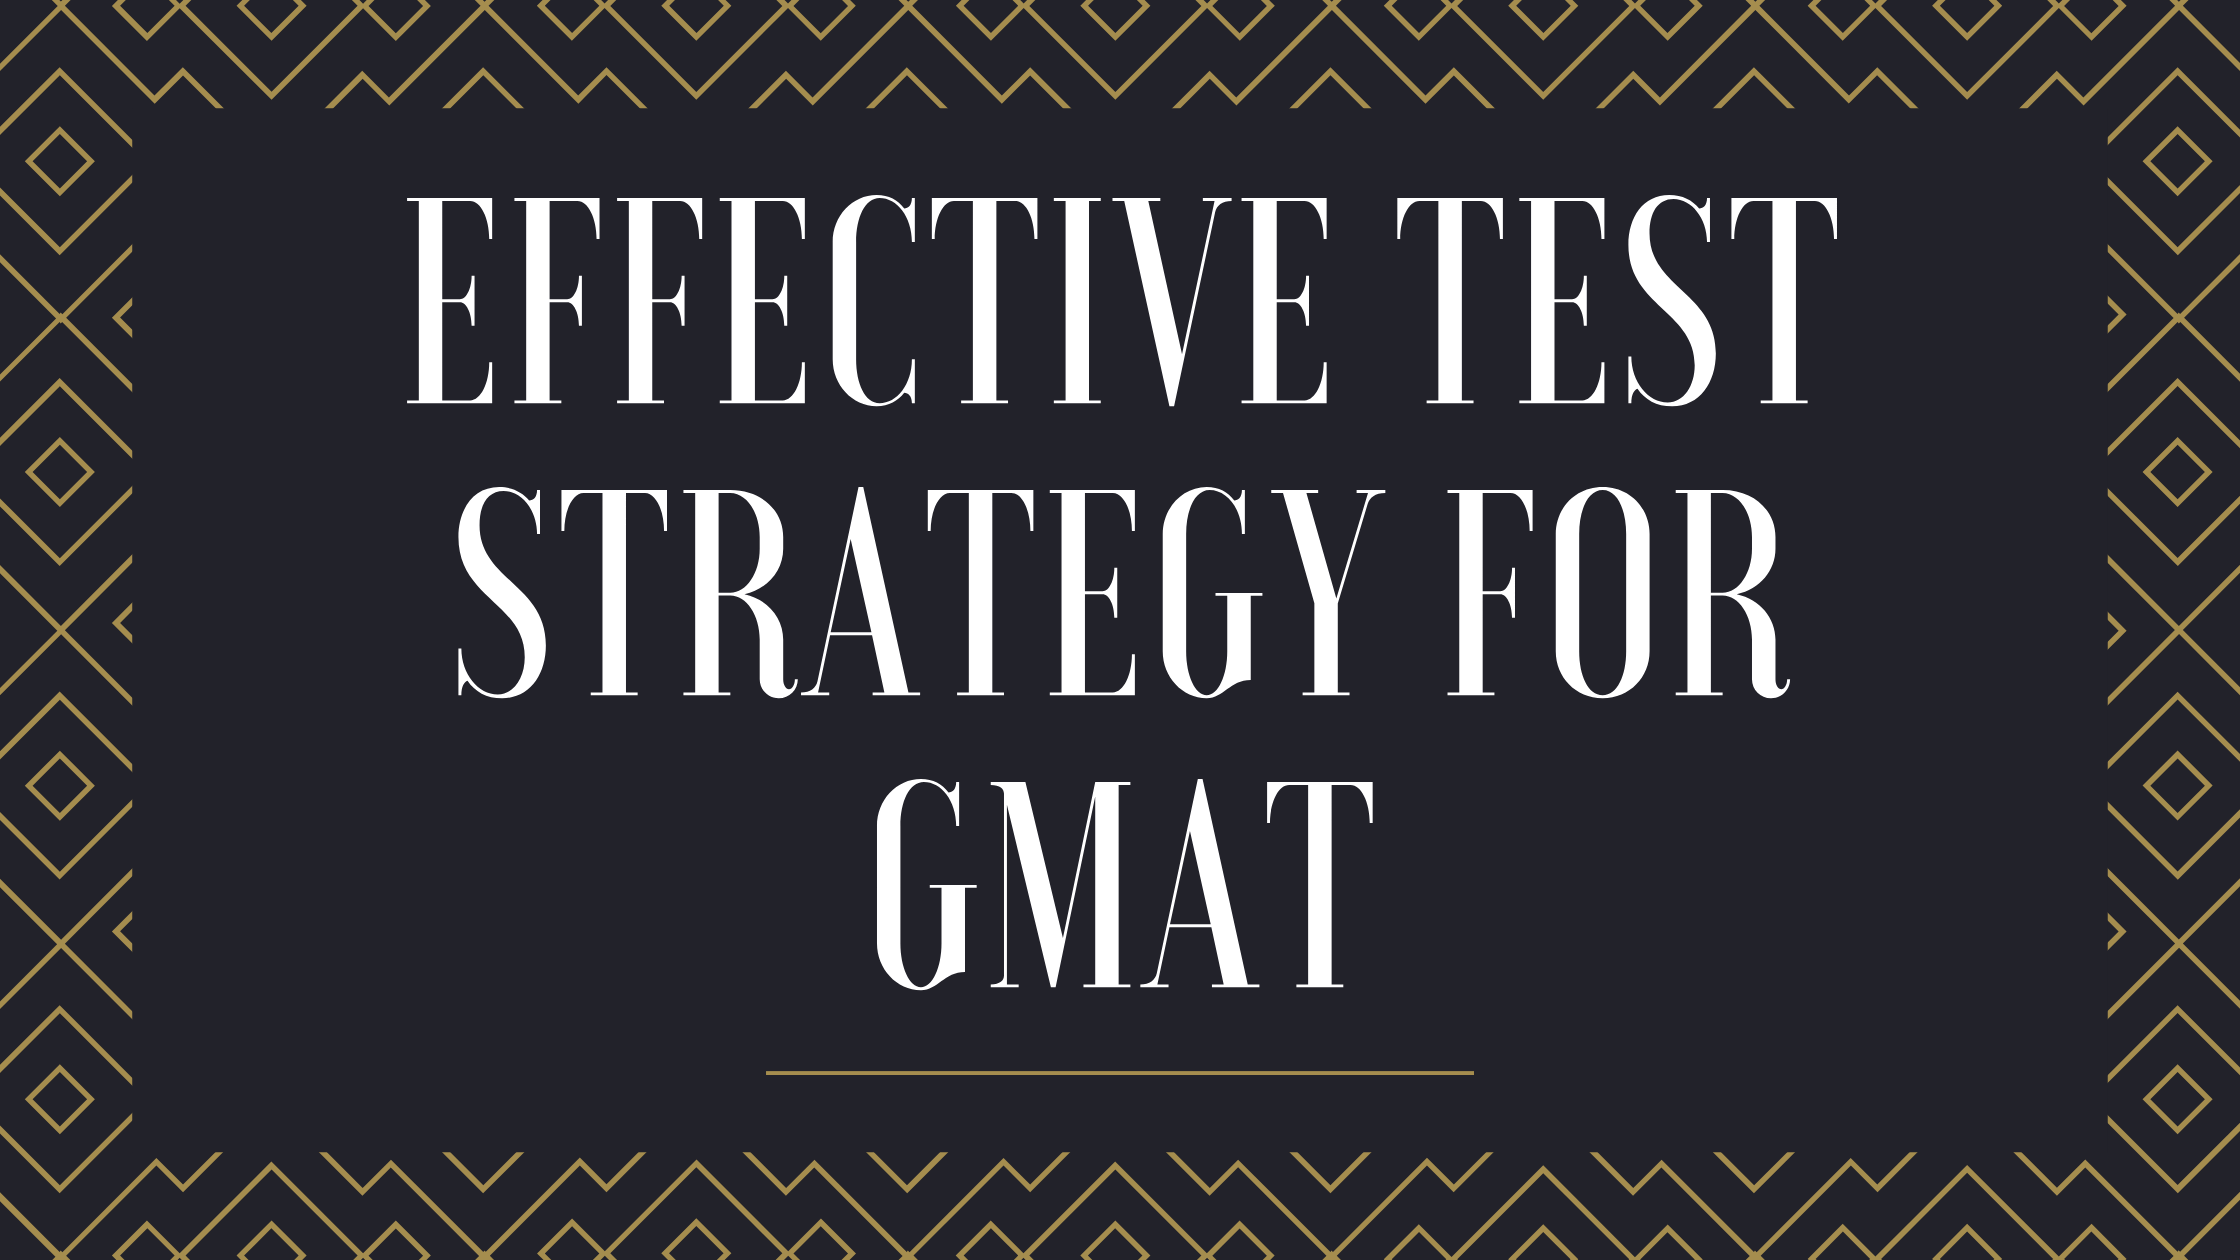 Effective Test Strategy for GMAT